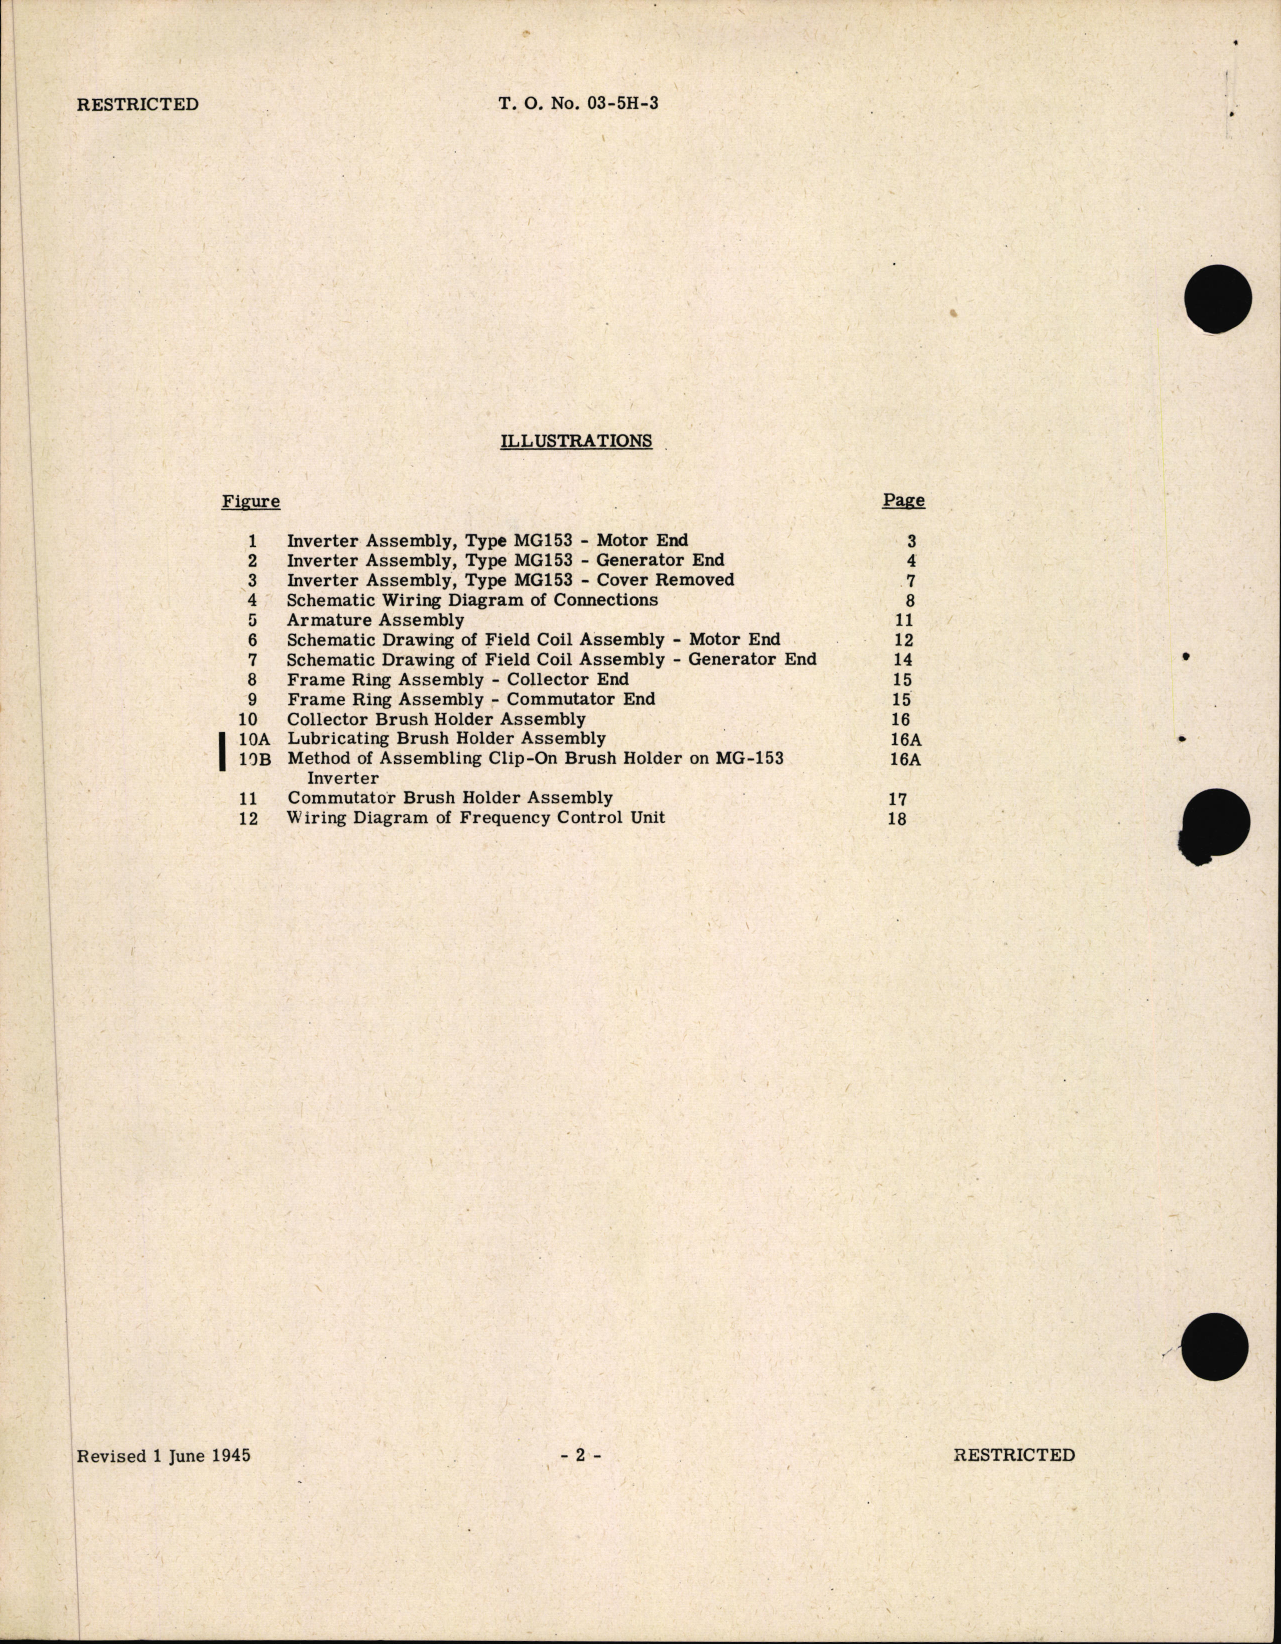 Sample page 6 from AirCorps Library document: Handbook of Instructions with Parts Catalog for Inverter Type MG-153